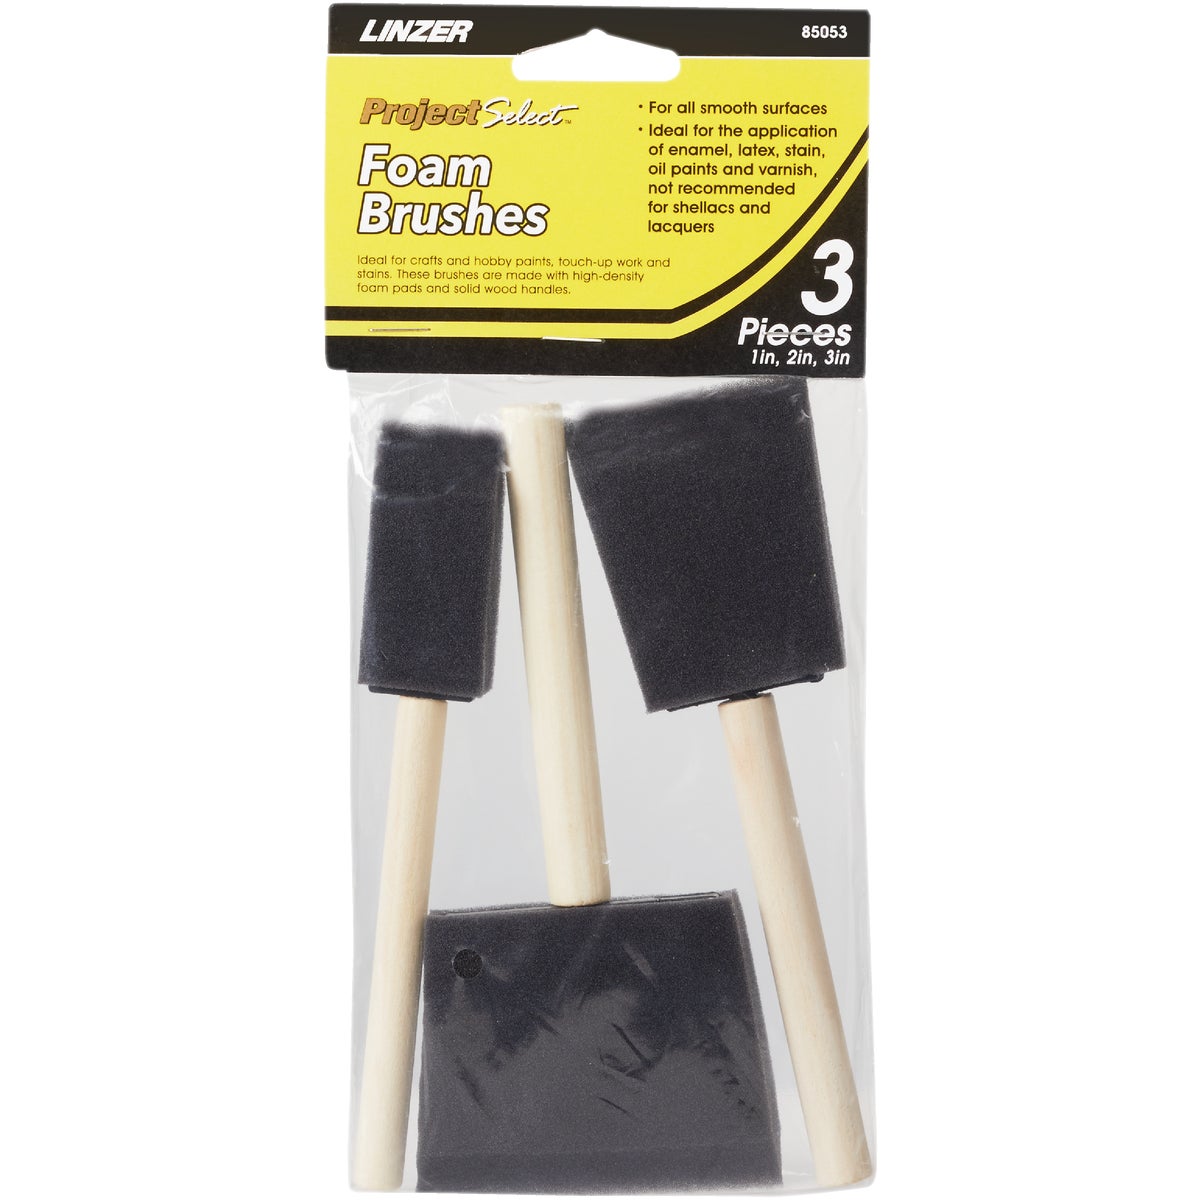 Linzer Project Select High Density Closed Foam Brush (3-Pack)